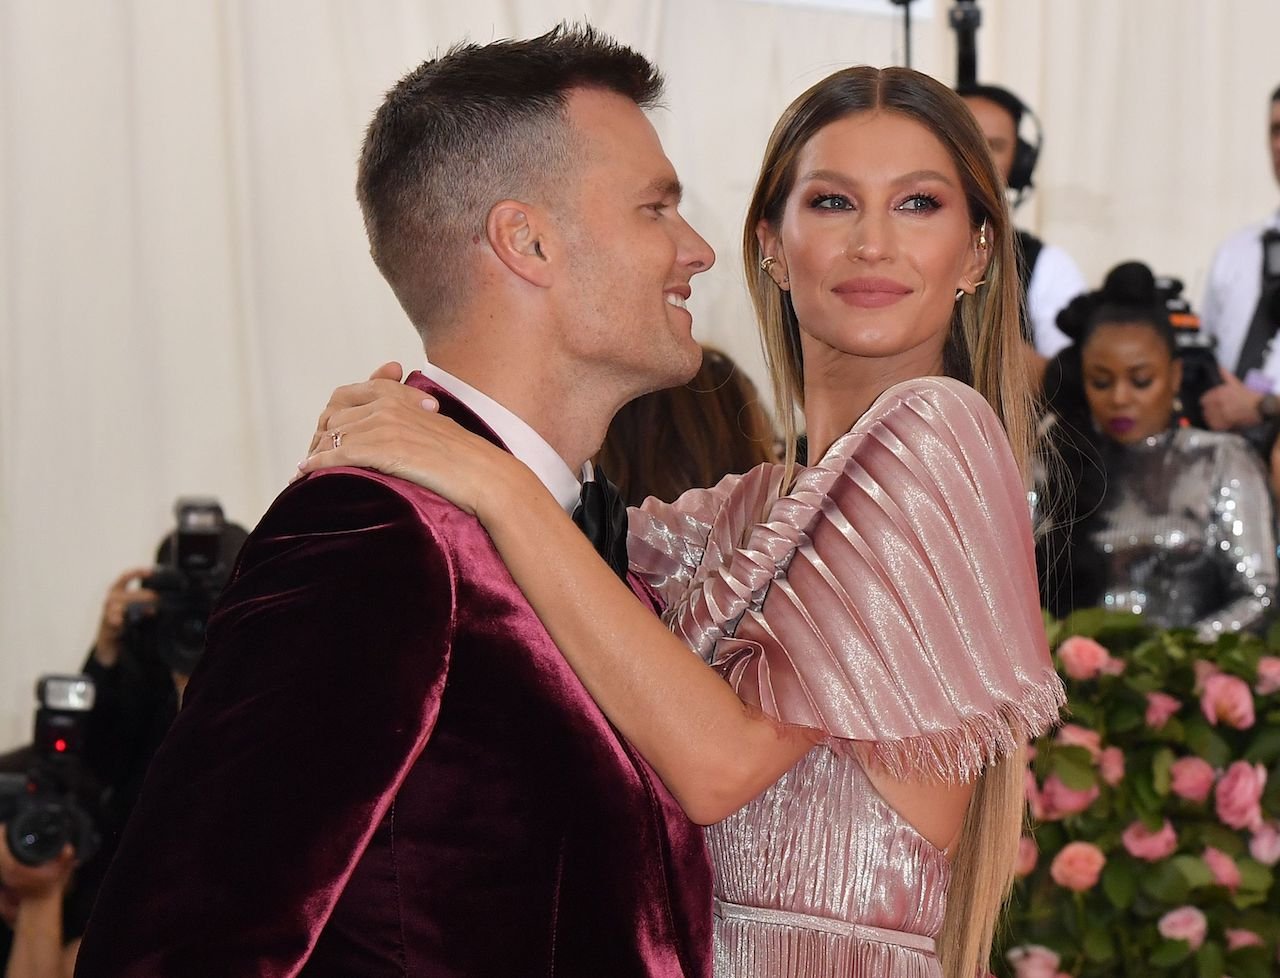 Tom Brady Reportedly Doesn’t Know ‘What To Do’ About His Marriage to Gisele Bündchen, Sources Say